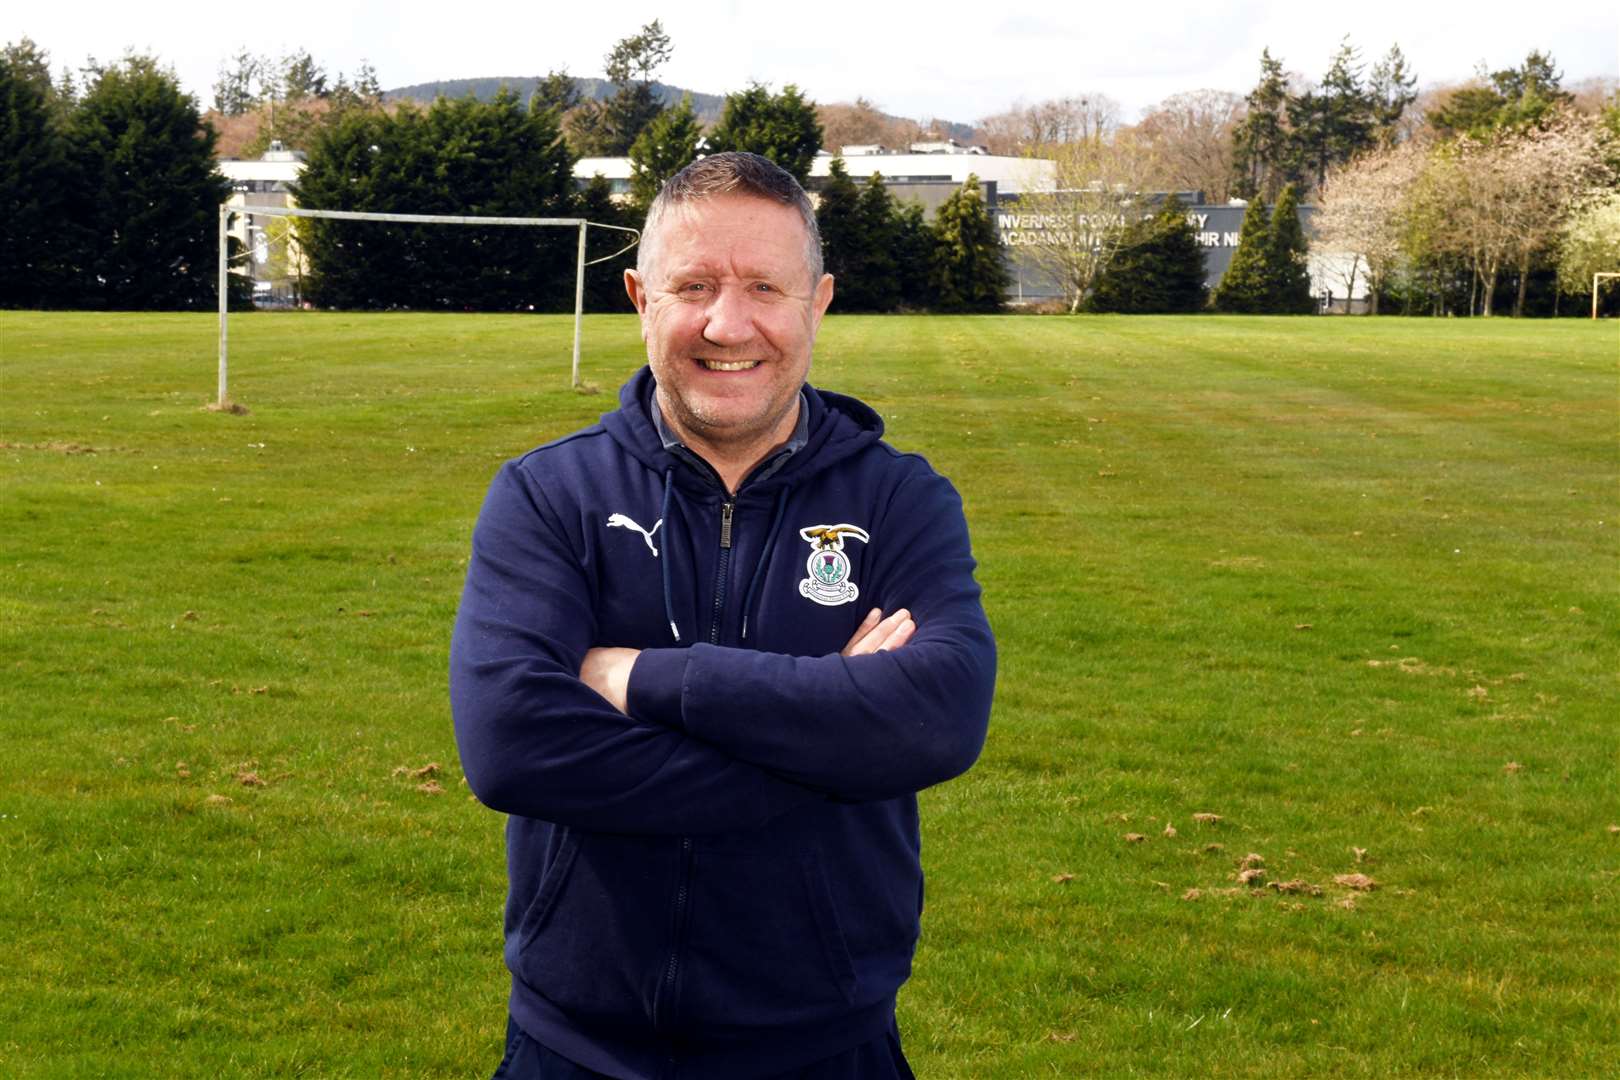 John Robertson at the playing fields opposite Inverness Royal Academy: John Robertson, Inverness Caledonian Thistle Sporting Director, standing in the vacant playing field adjacent to Inverness Royal Academy. Picture: James Mackenzie.